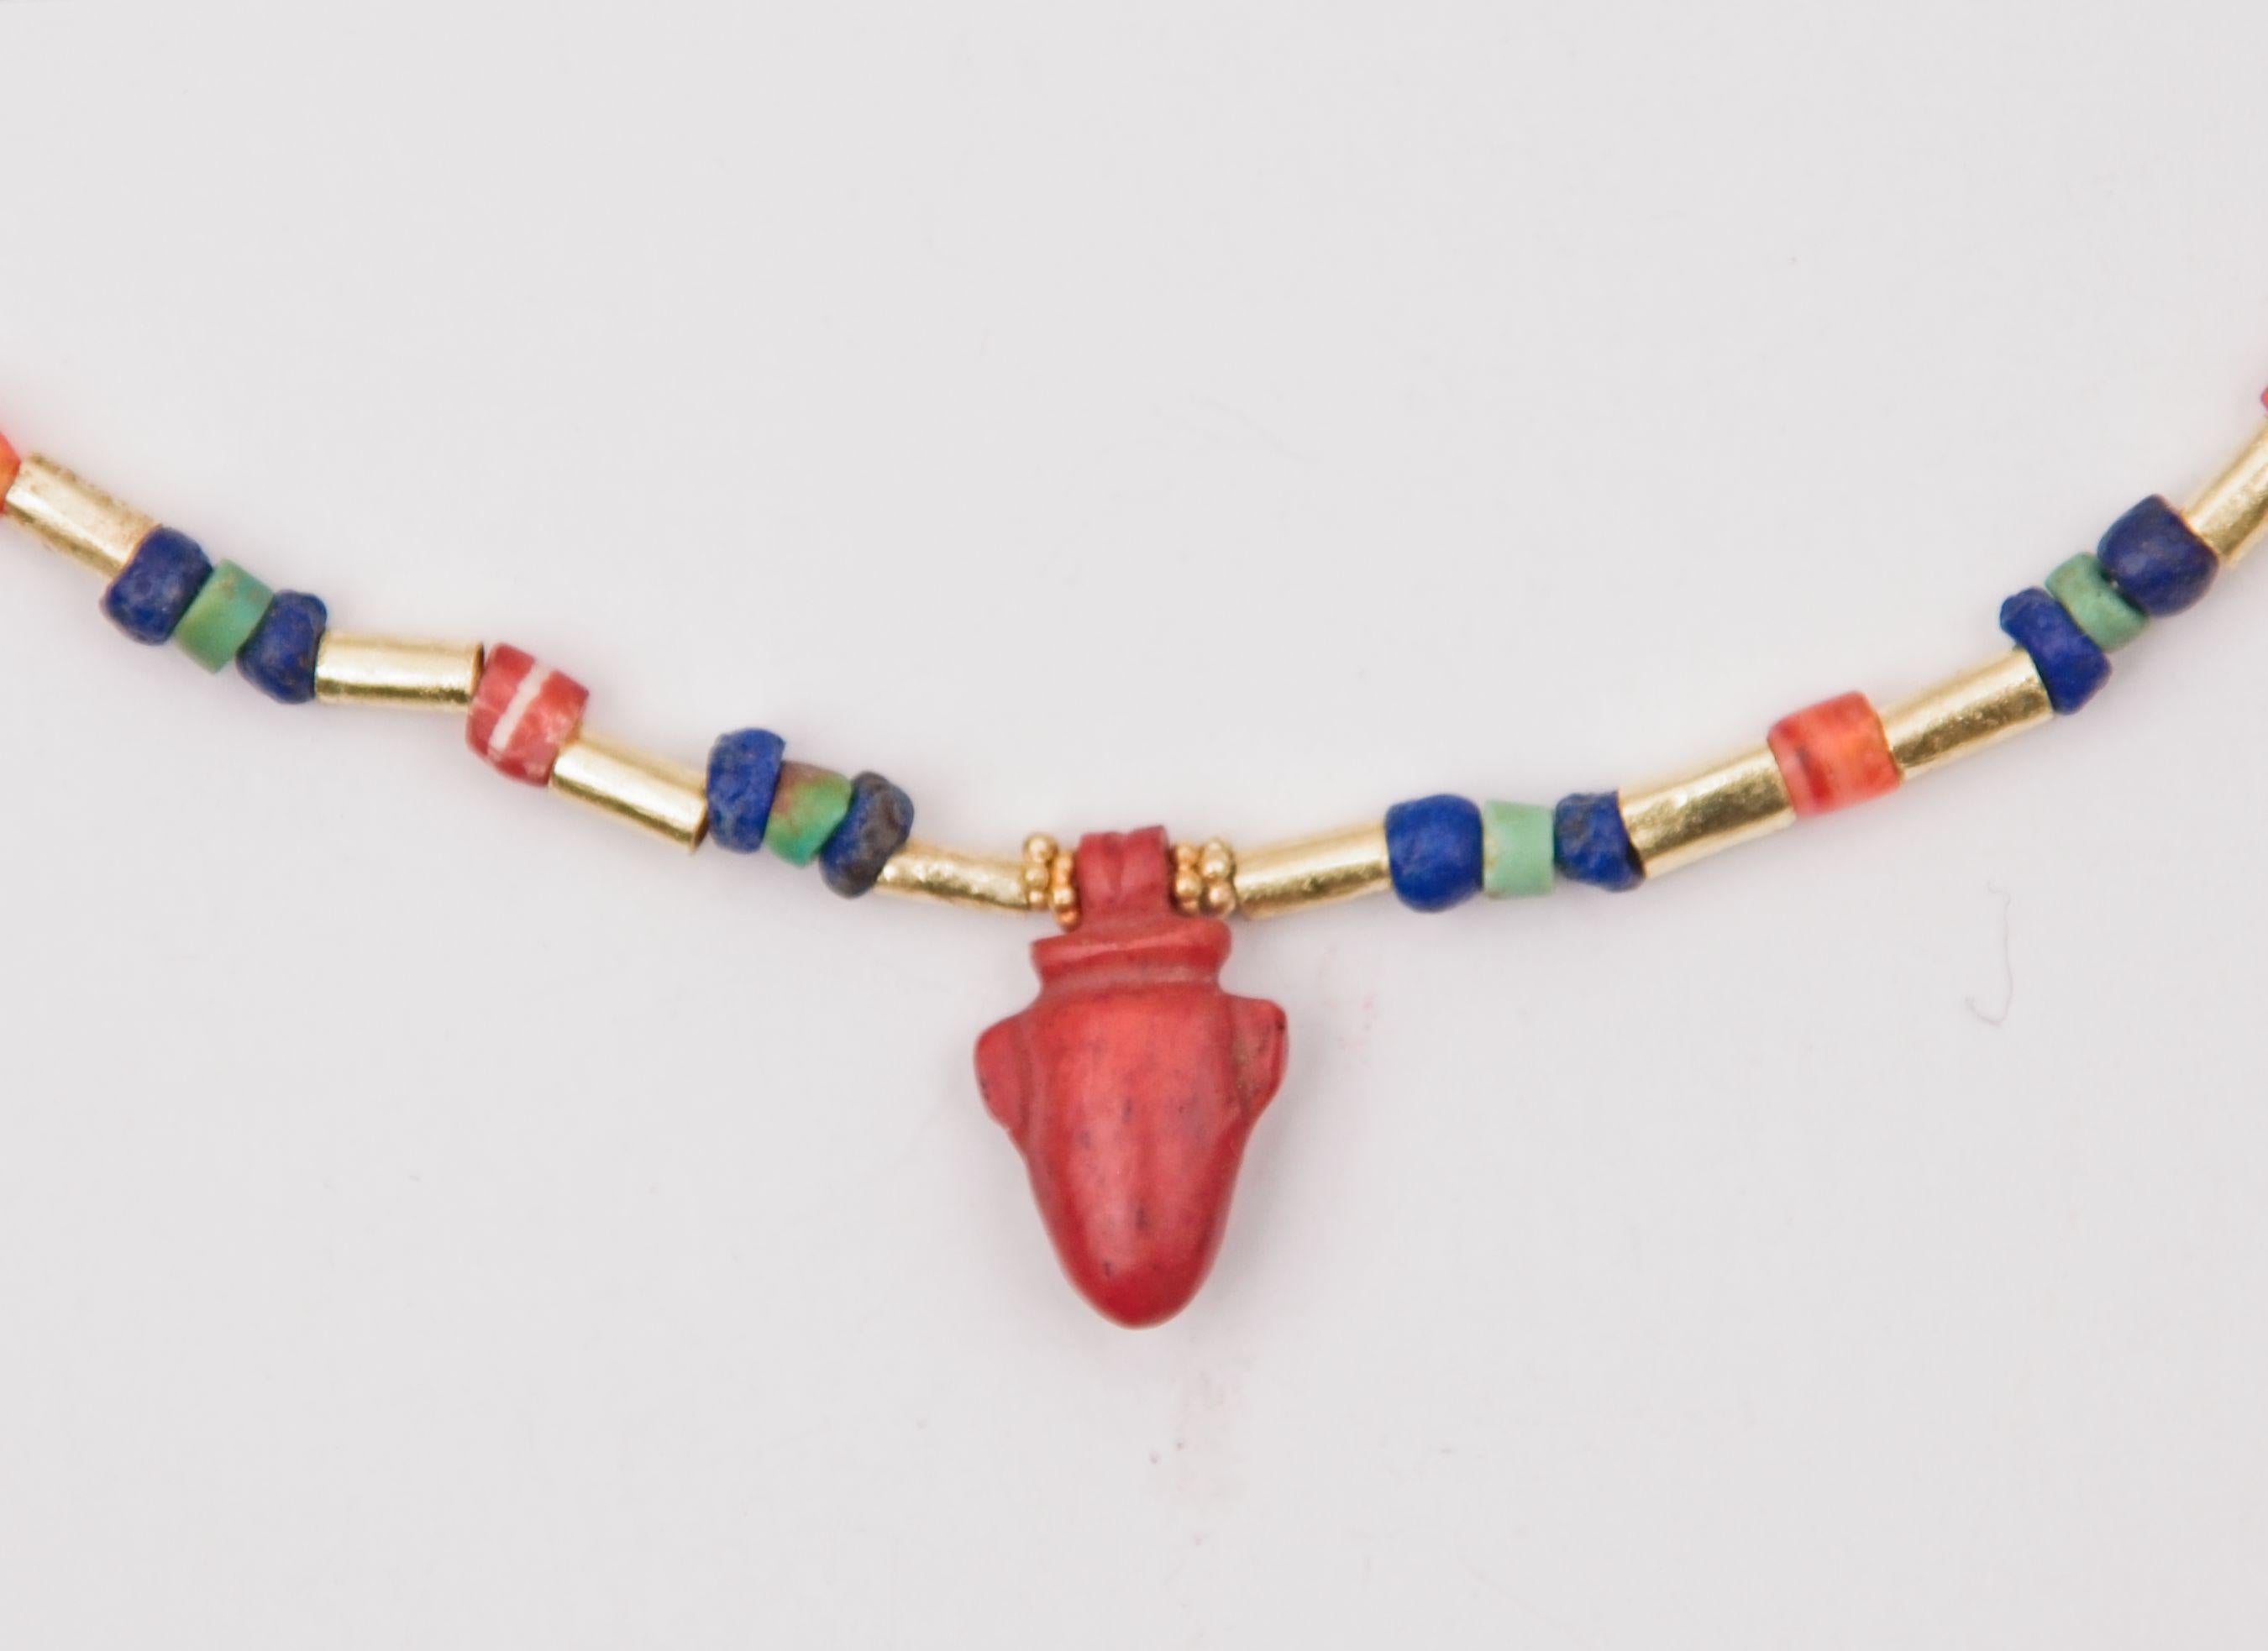 Sixty 22k gold tube beads alternating with thirty groupings of lapis lazuli, turquoise beads, and thirty carnelian barrel-shaped beads. The turquoise and lapis module consists of a small turquoise disc bead faced on either side with a similarly